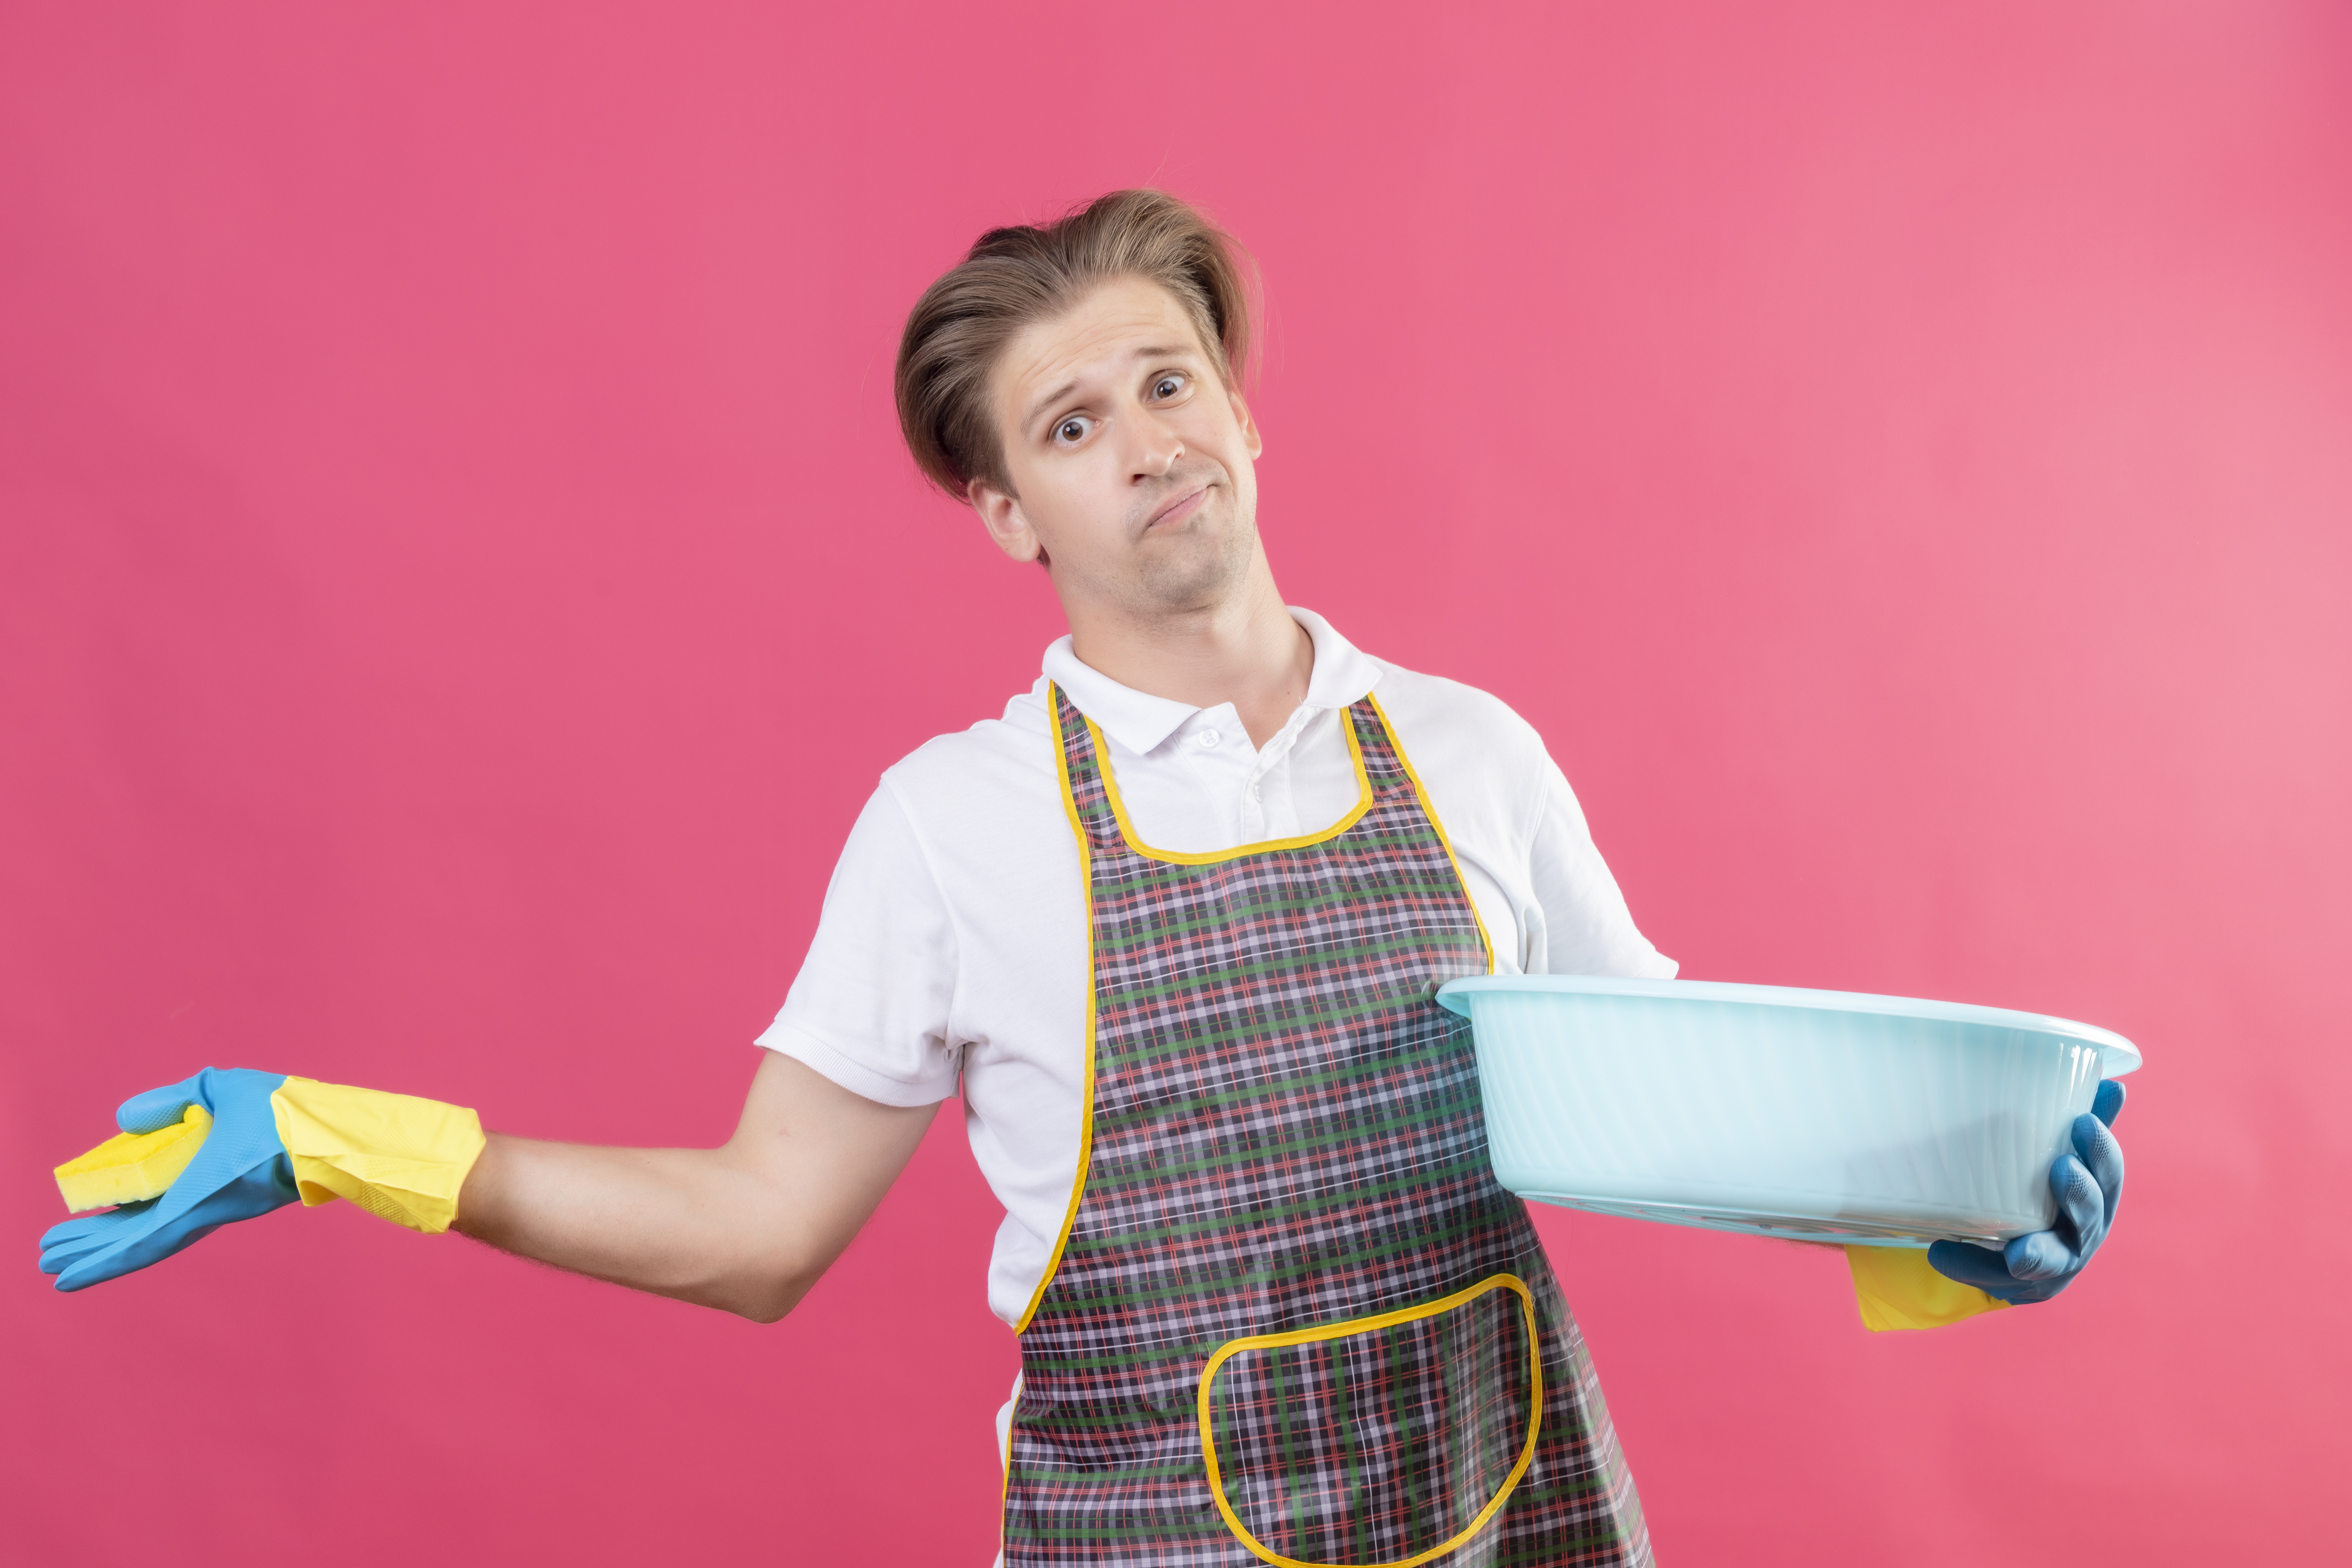 Man wearing an apron and holding a basin, looking confused | Source: stockking on Freepik